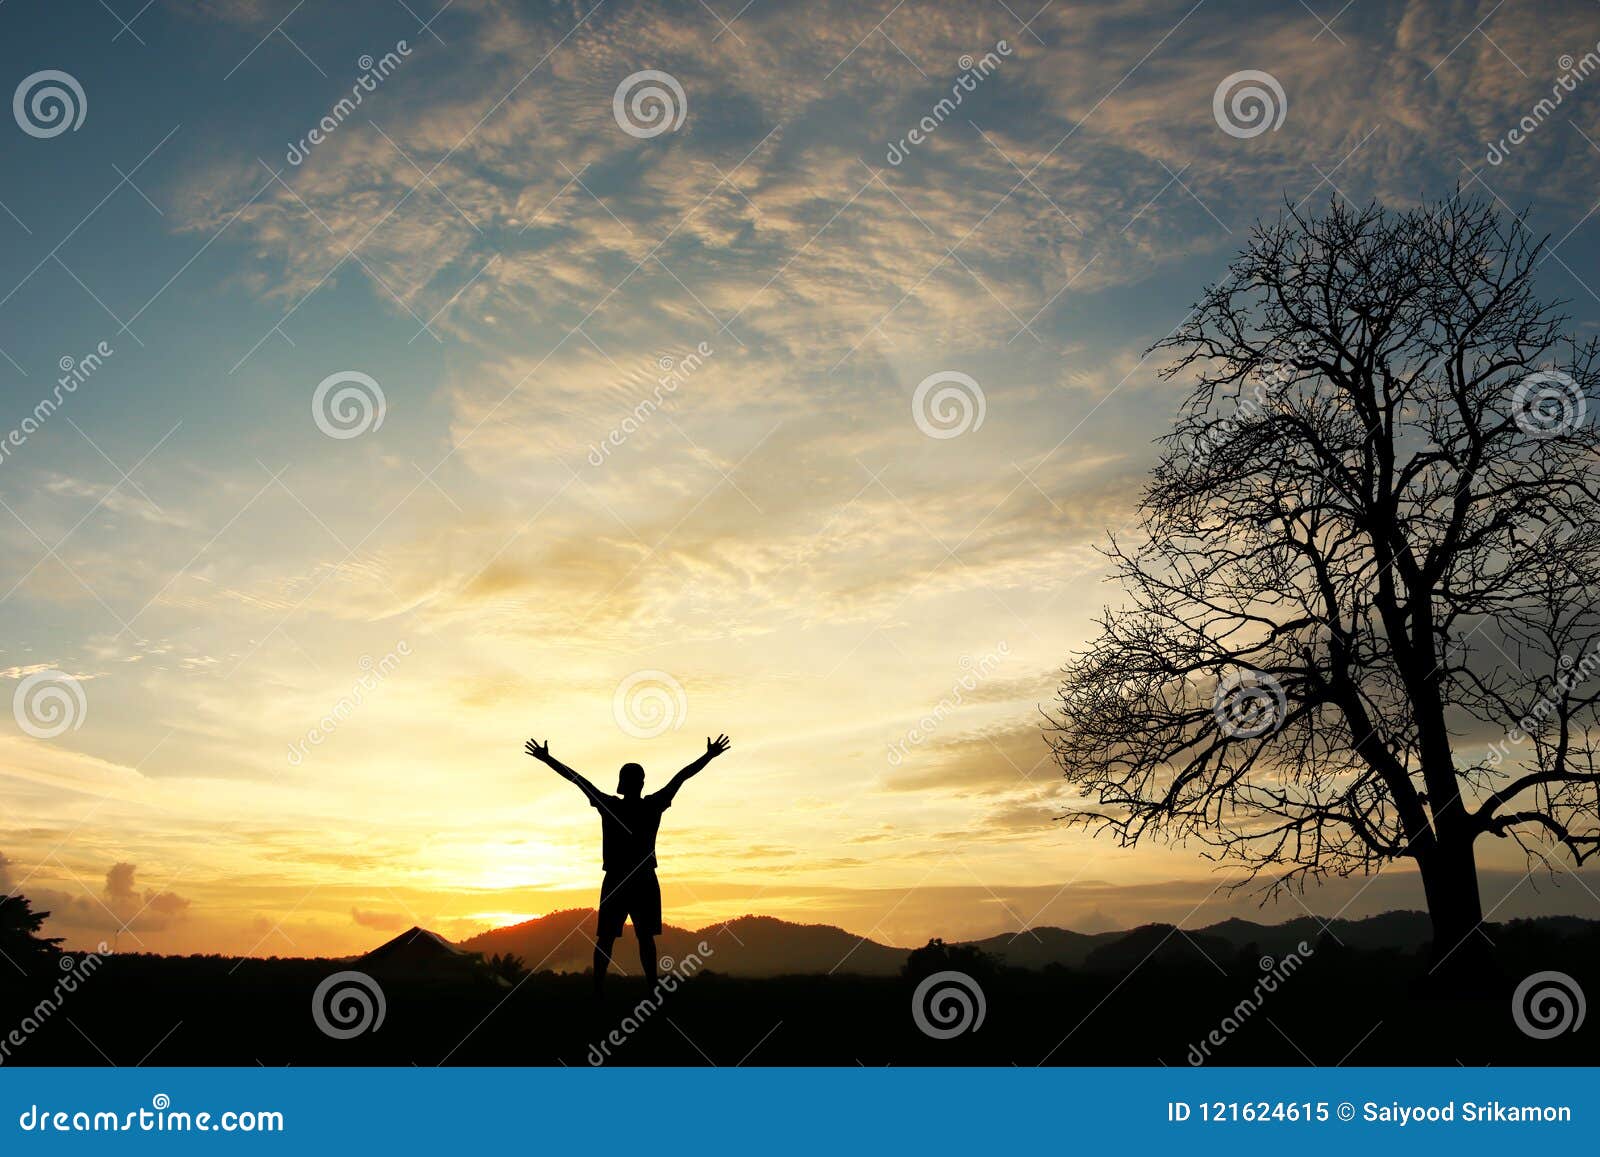 man holding arms up in praise